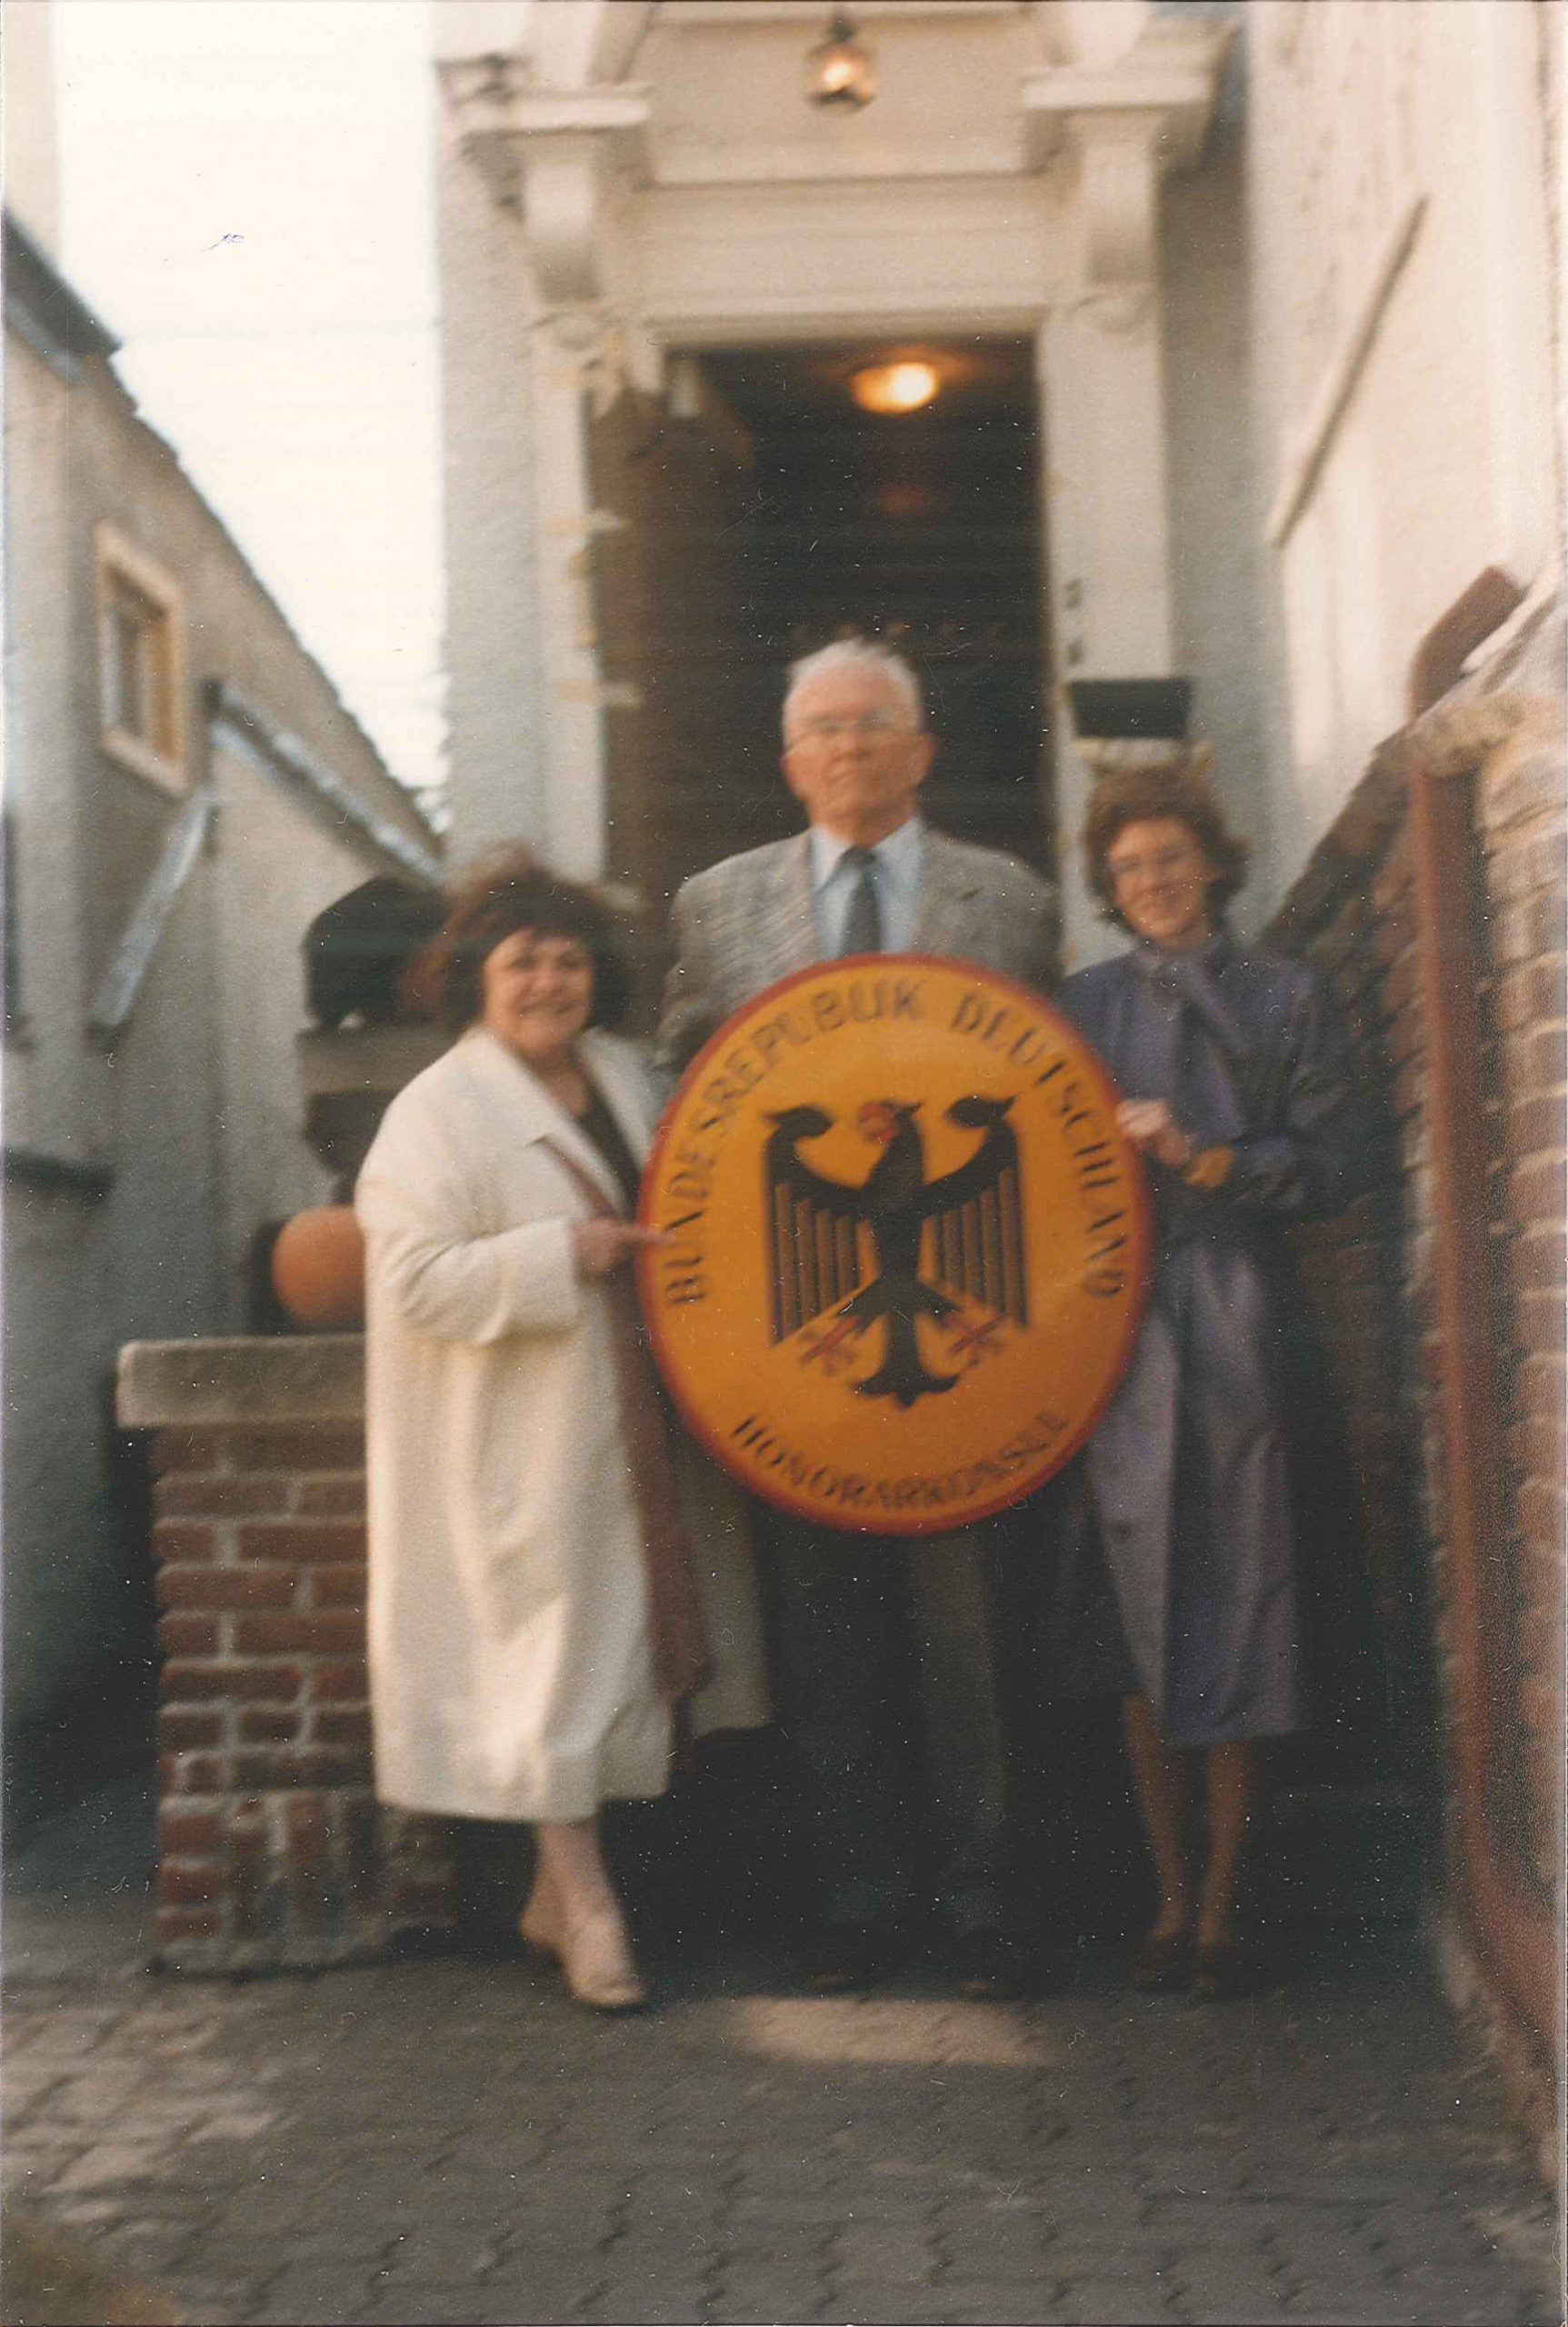 Deborah Spindler, Mrs. Gummelt and Mr. Thiele on the porch of the holding a German coat of arms.